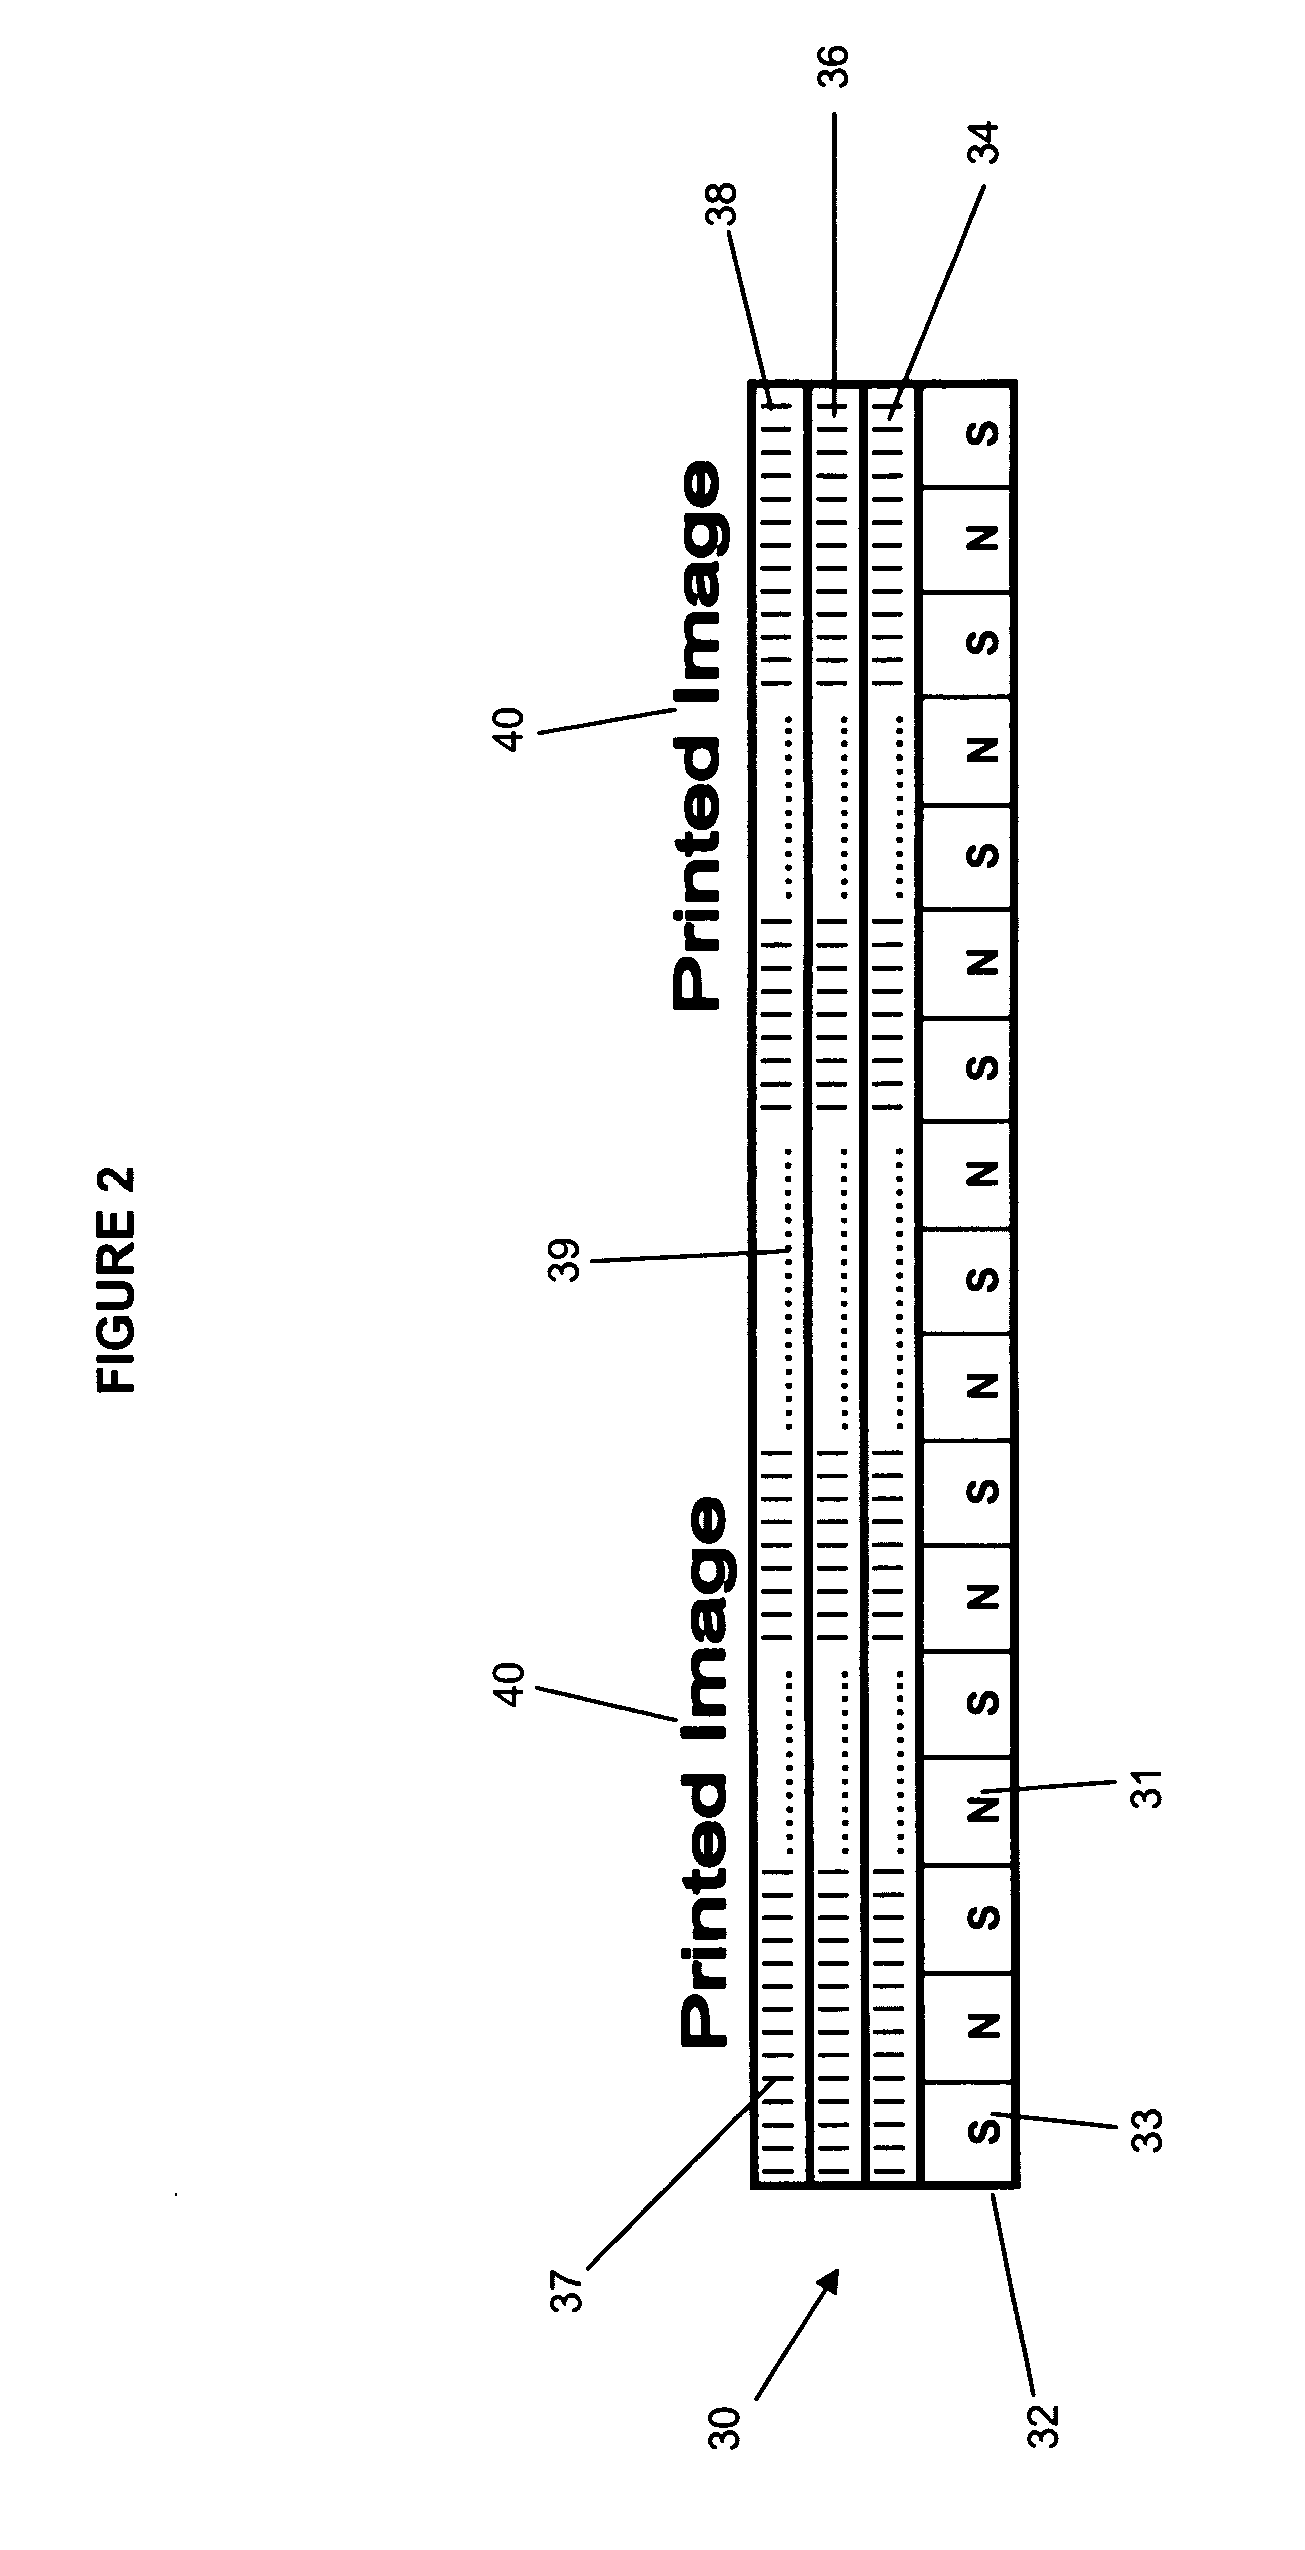 Magnetic business communication product and method of producing same